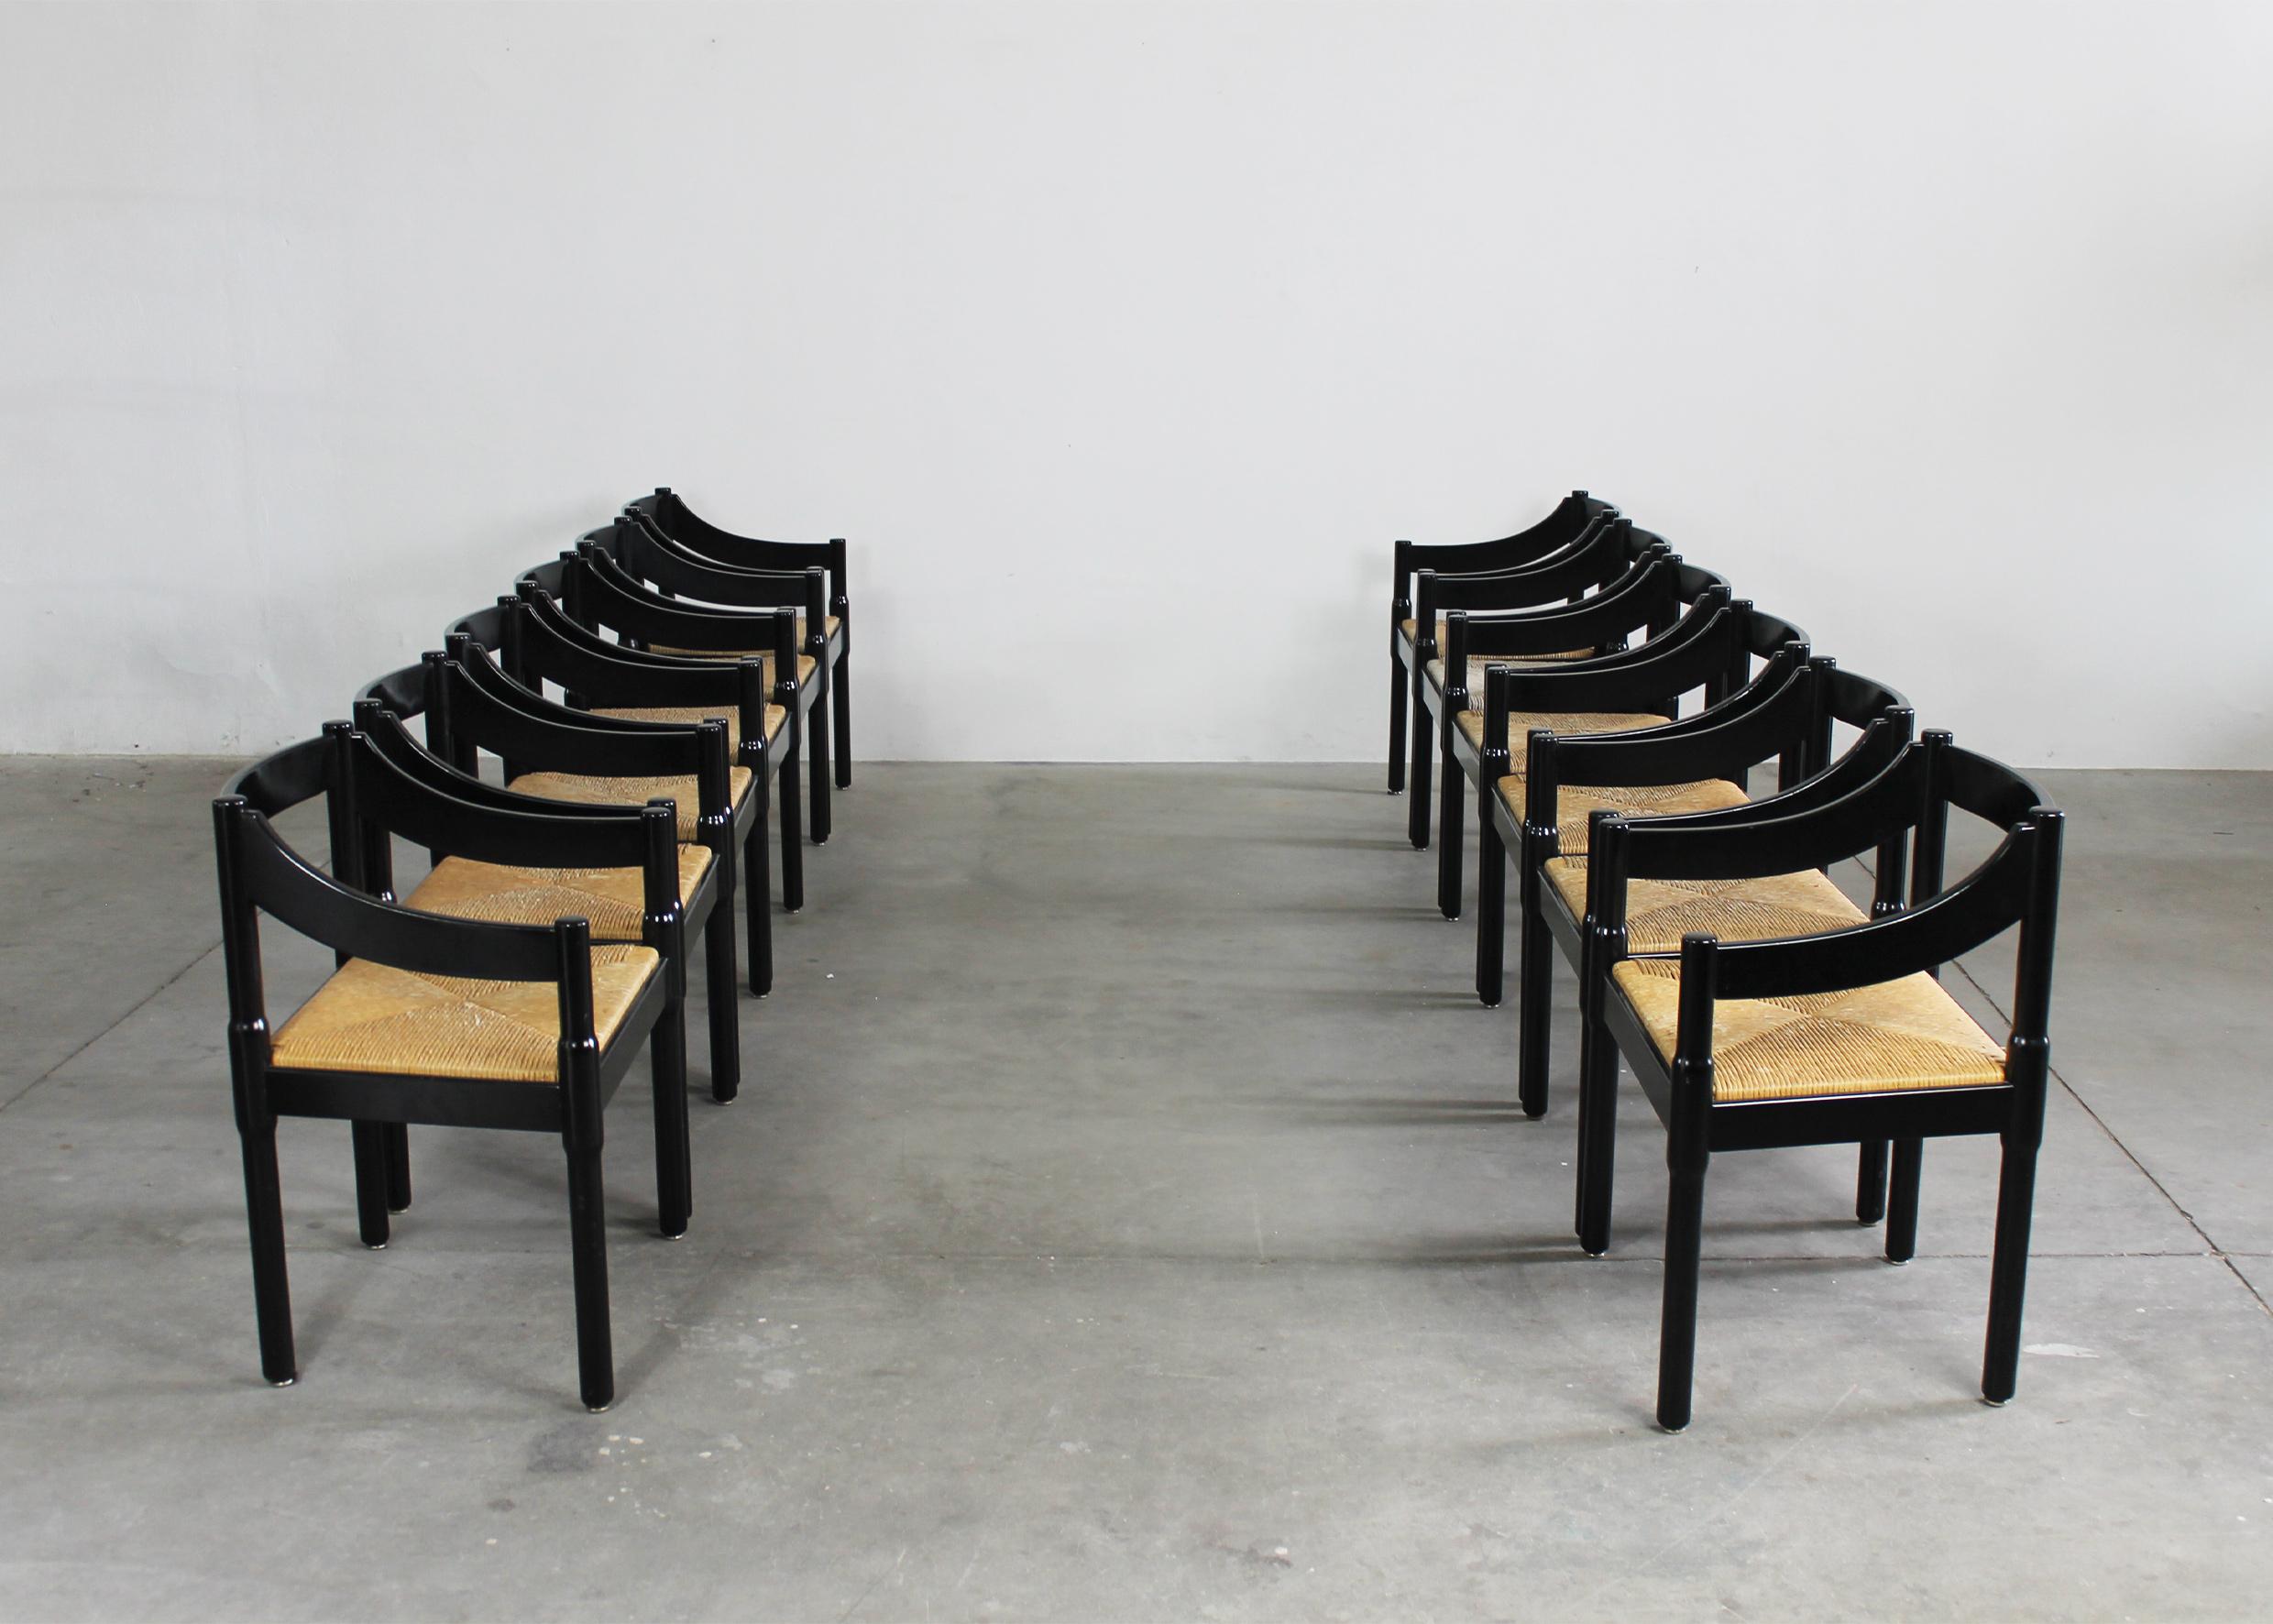 Vico Magistretti Set of Twelve Black Carimate Chairs by Cassina 1960s In Good Condition For Sale In Montecatini Terme, IT